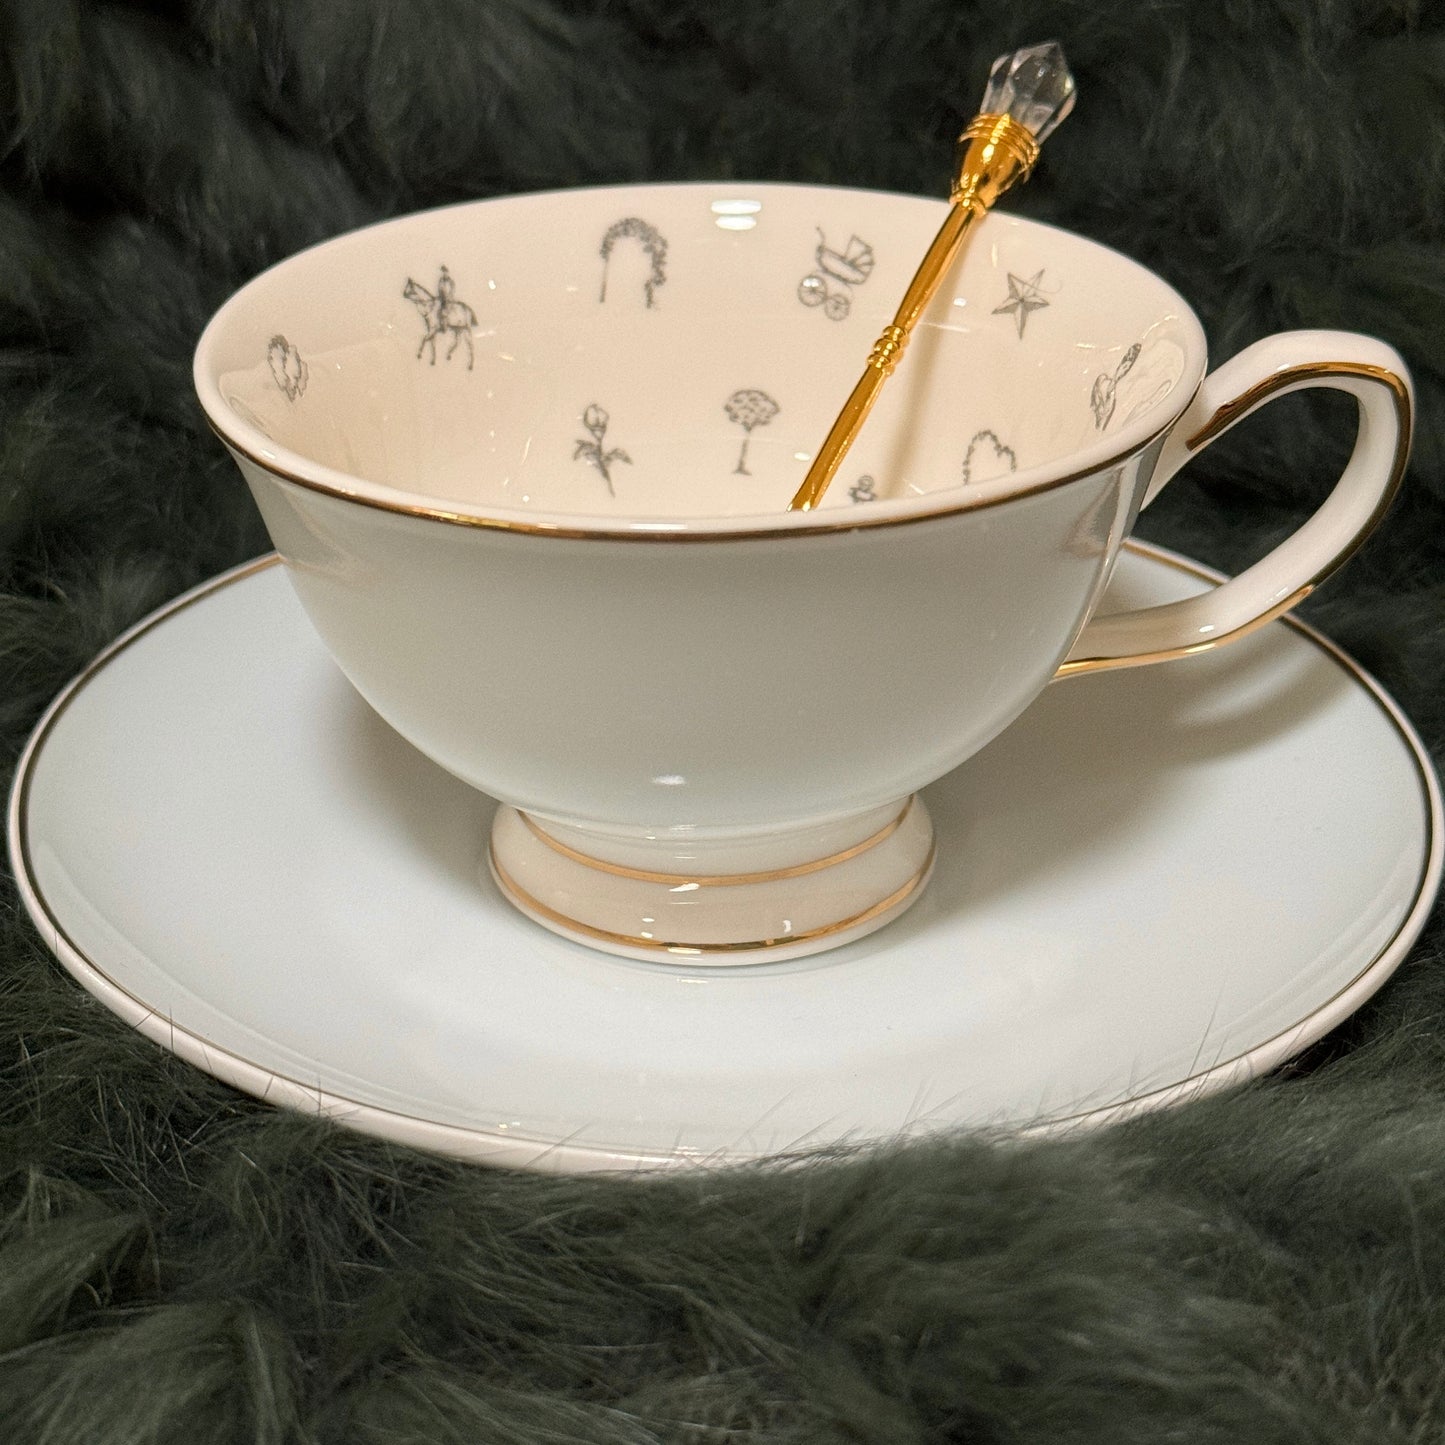 This is a pale blue teacup and saucer set. It is a lovely pale blue colour and has 32 tea leaf reading images permanently fired inside the teacup. Remove the guess work out of tea leaf reading. Perfect gift for Mom, friend or loved one.